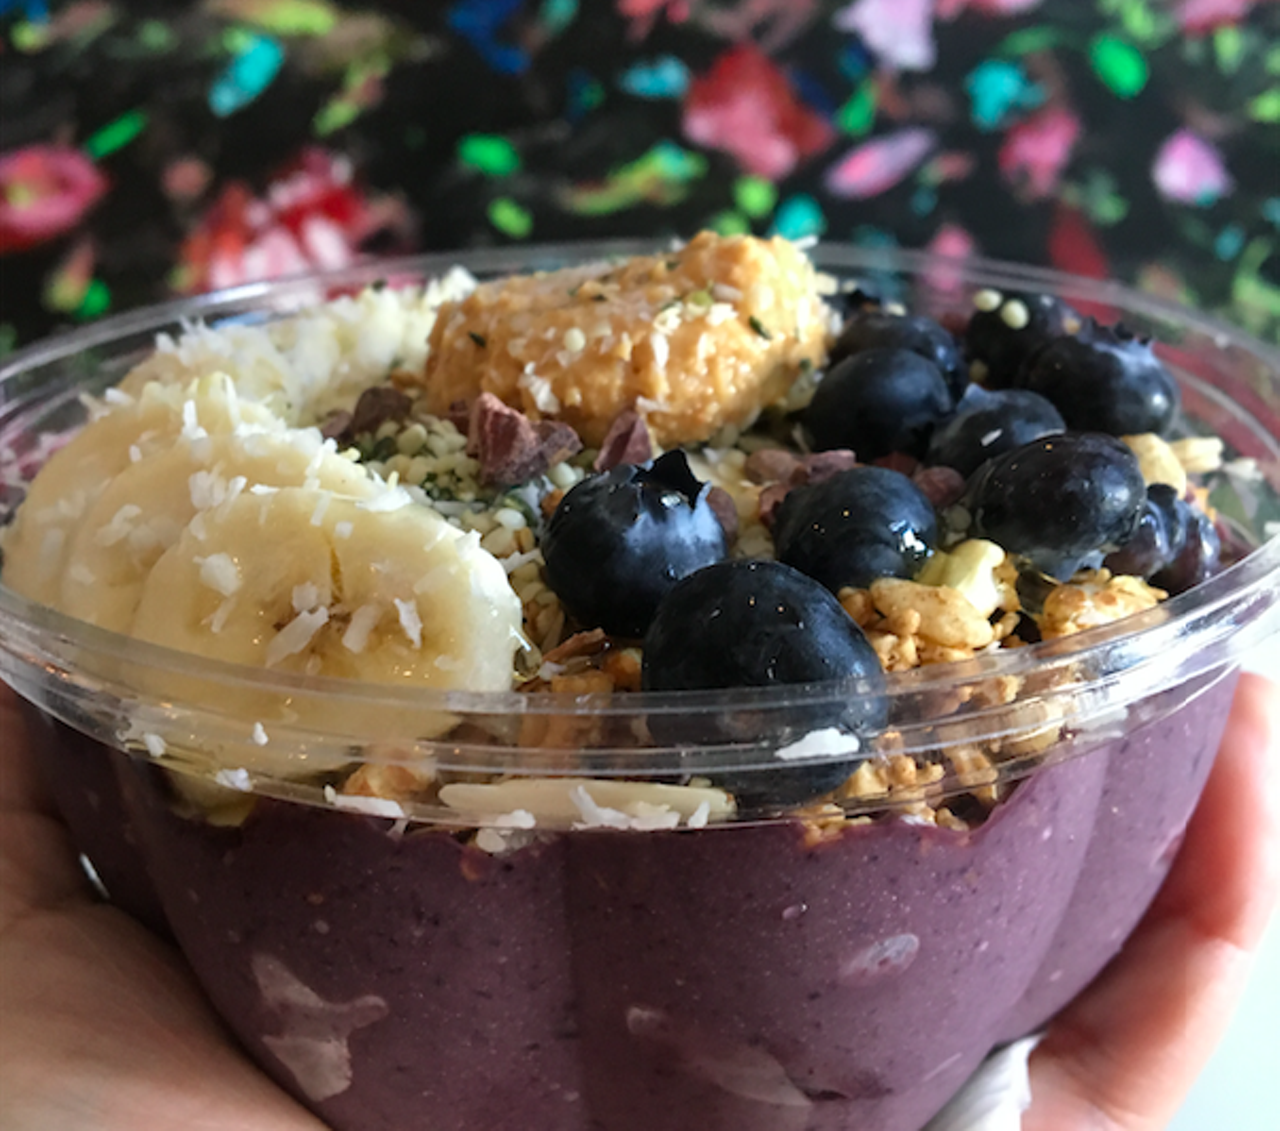 Herb-n-Juice 
1502 S. Flores St., (210) 724-6020, instagram.com/herbnjuicesa
The newest spot to offer acai and dragon (as in dragonfruit) bowls is tucked away in a small nook inside the history Wong Grocery Co. Owner Paul Martinez, 23, offers all organic, and plant-based bowls made-to-order so don’t visit if you’re in a hurry. What made these bowls stand out during my research was Martinez’s commitment to healthy, sugar-free bowls. Try the peanut butter crunch with acai, peanut butter, apple, banana and cinnamon topped with bananas, blueberries, gluten-free granola, coconut flakes, crushed almonds hemp seeds, cacao nibs and agave. Bowls are $9.95; all medium smoothies can be turned into bowls for an additional $2. Hours are still being fleshed out, so call before heading in; the shop is closed Mondays. 
Photo by Jessica Elizarraras